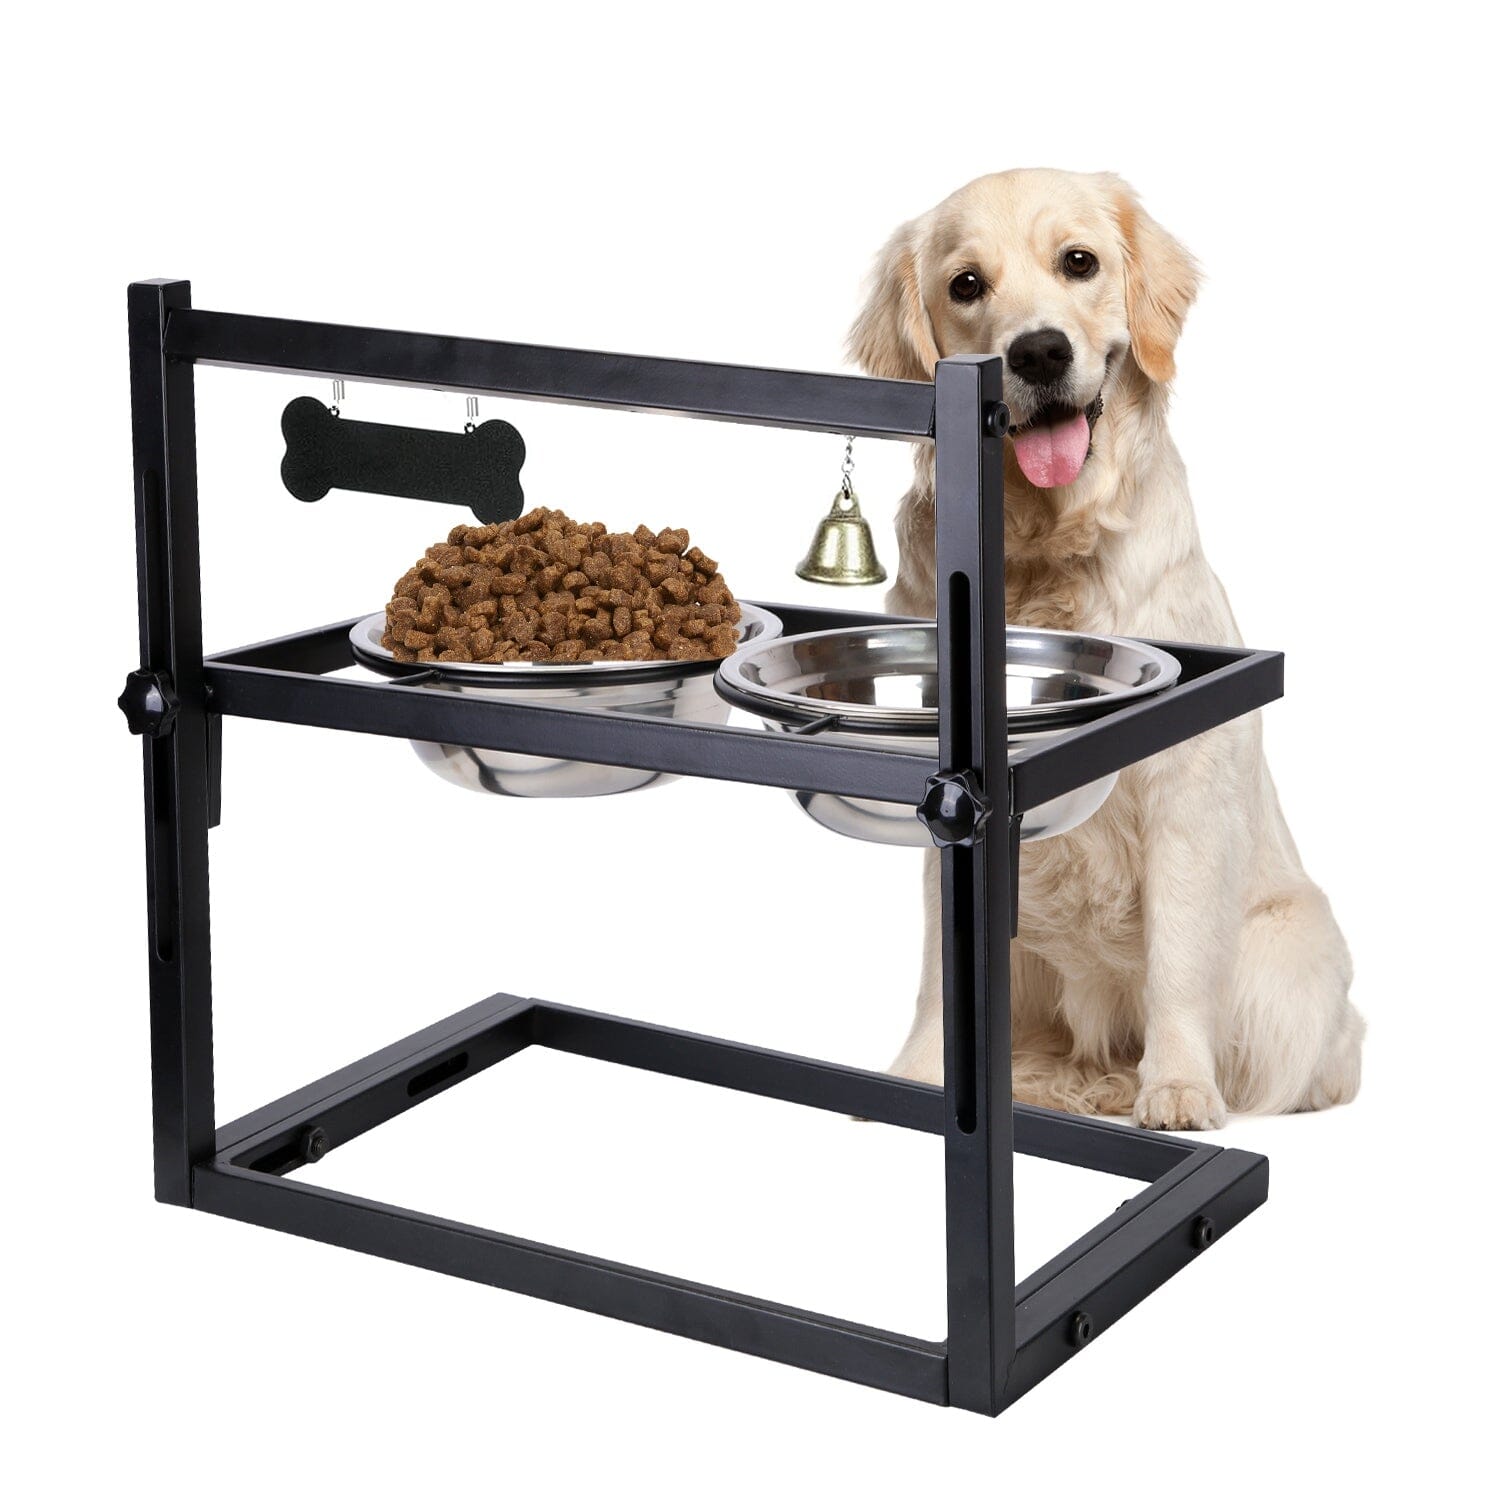 https://dailysale.com/cdn/shop/files/dog-raised-bowls-with-adjustable-height-stainless-steel-pet-supplies-dailysale-681193.jpg?v=1698788064